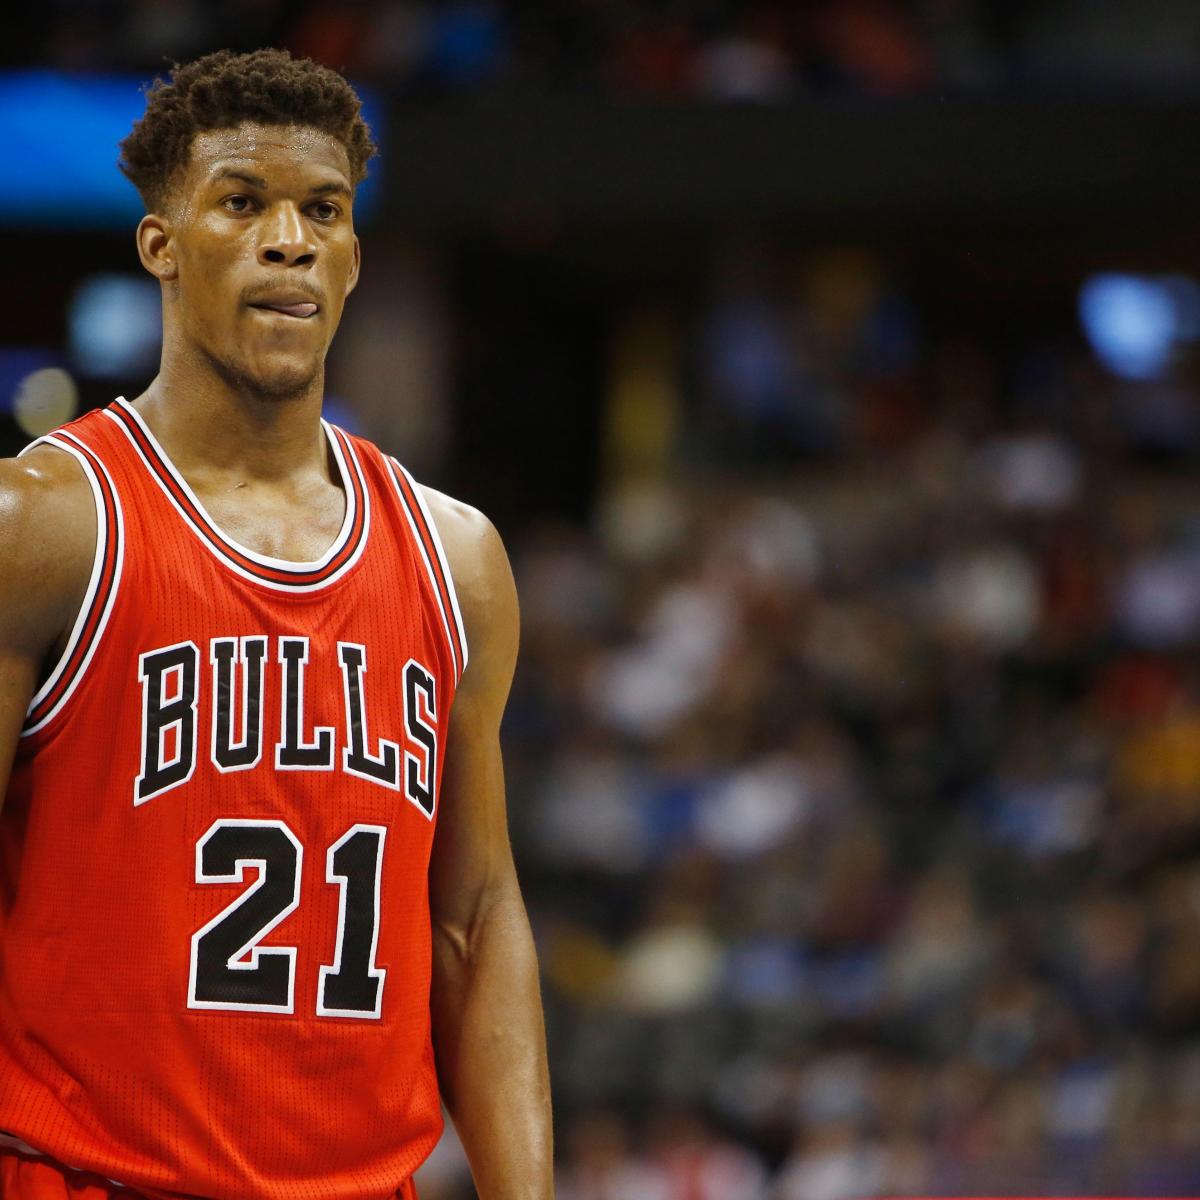 From high school to college to the Heat, no part of Jimmy Butler's story  has been easy